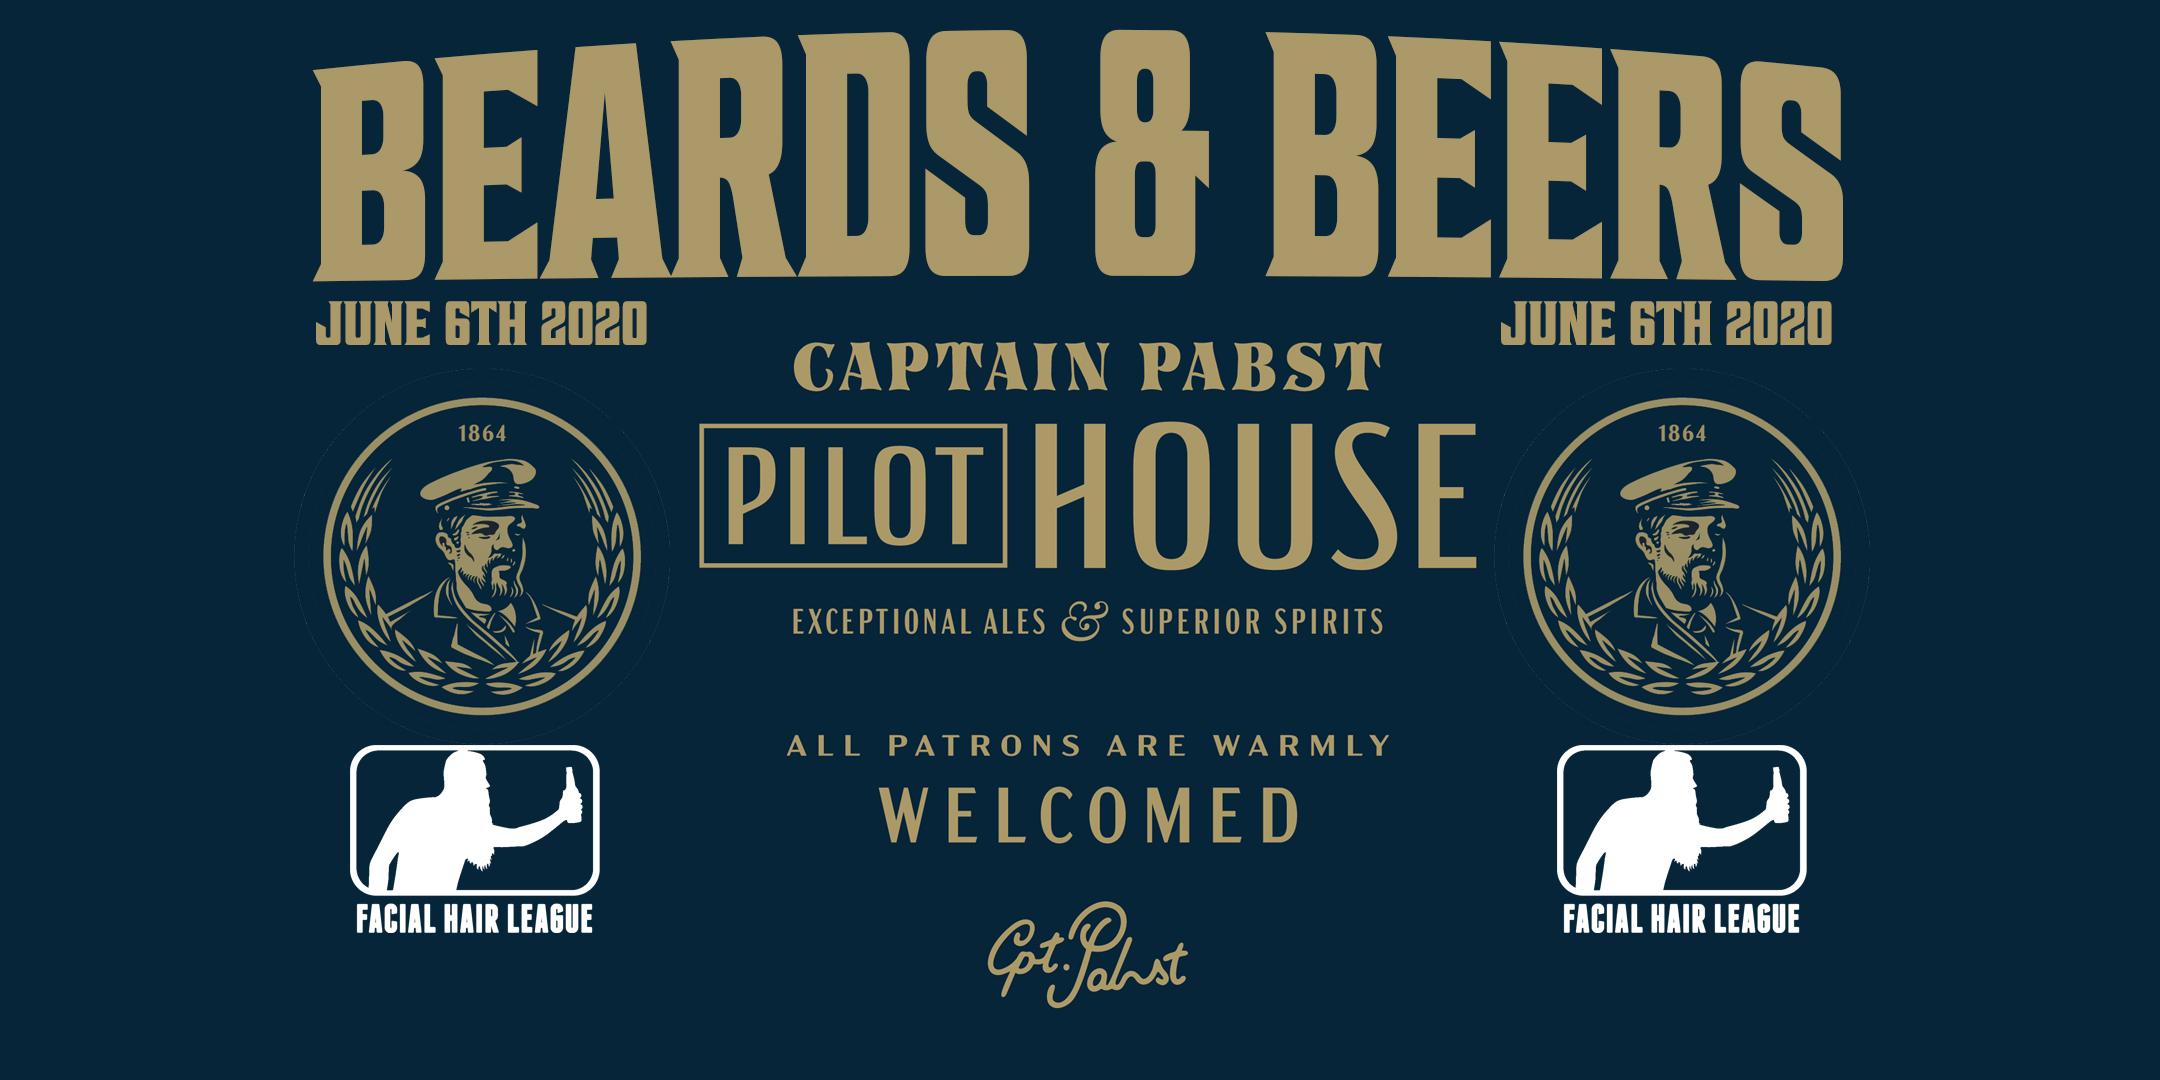 Beards & Beers At The Pilot House